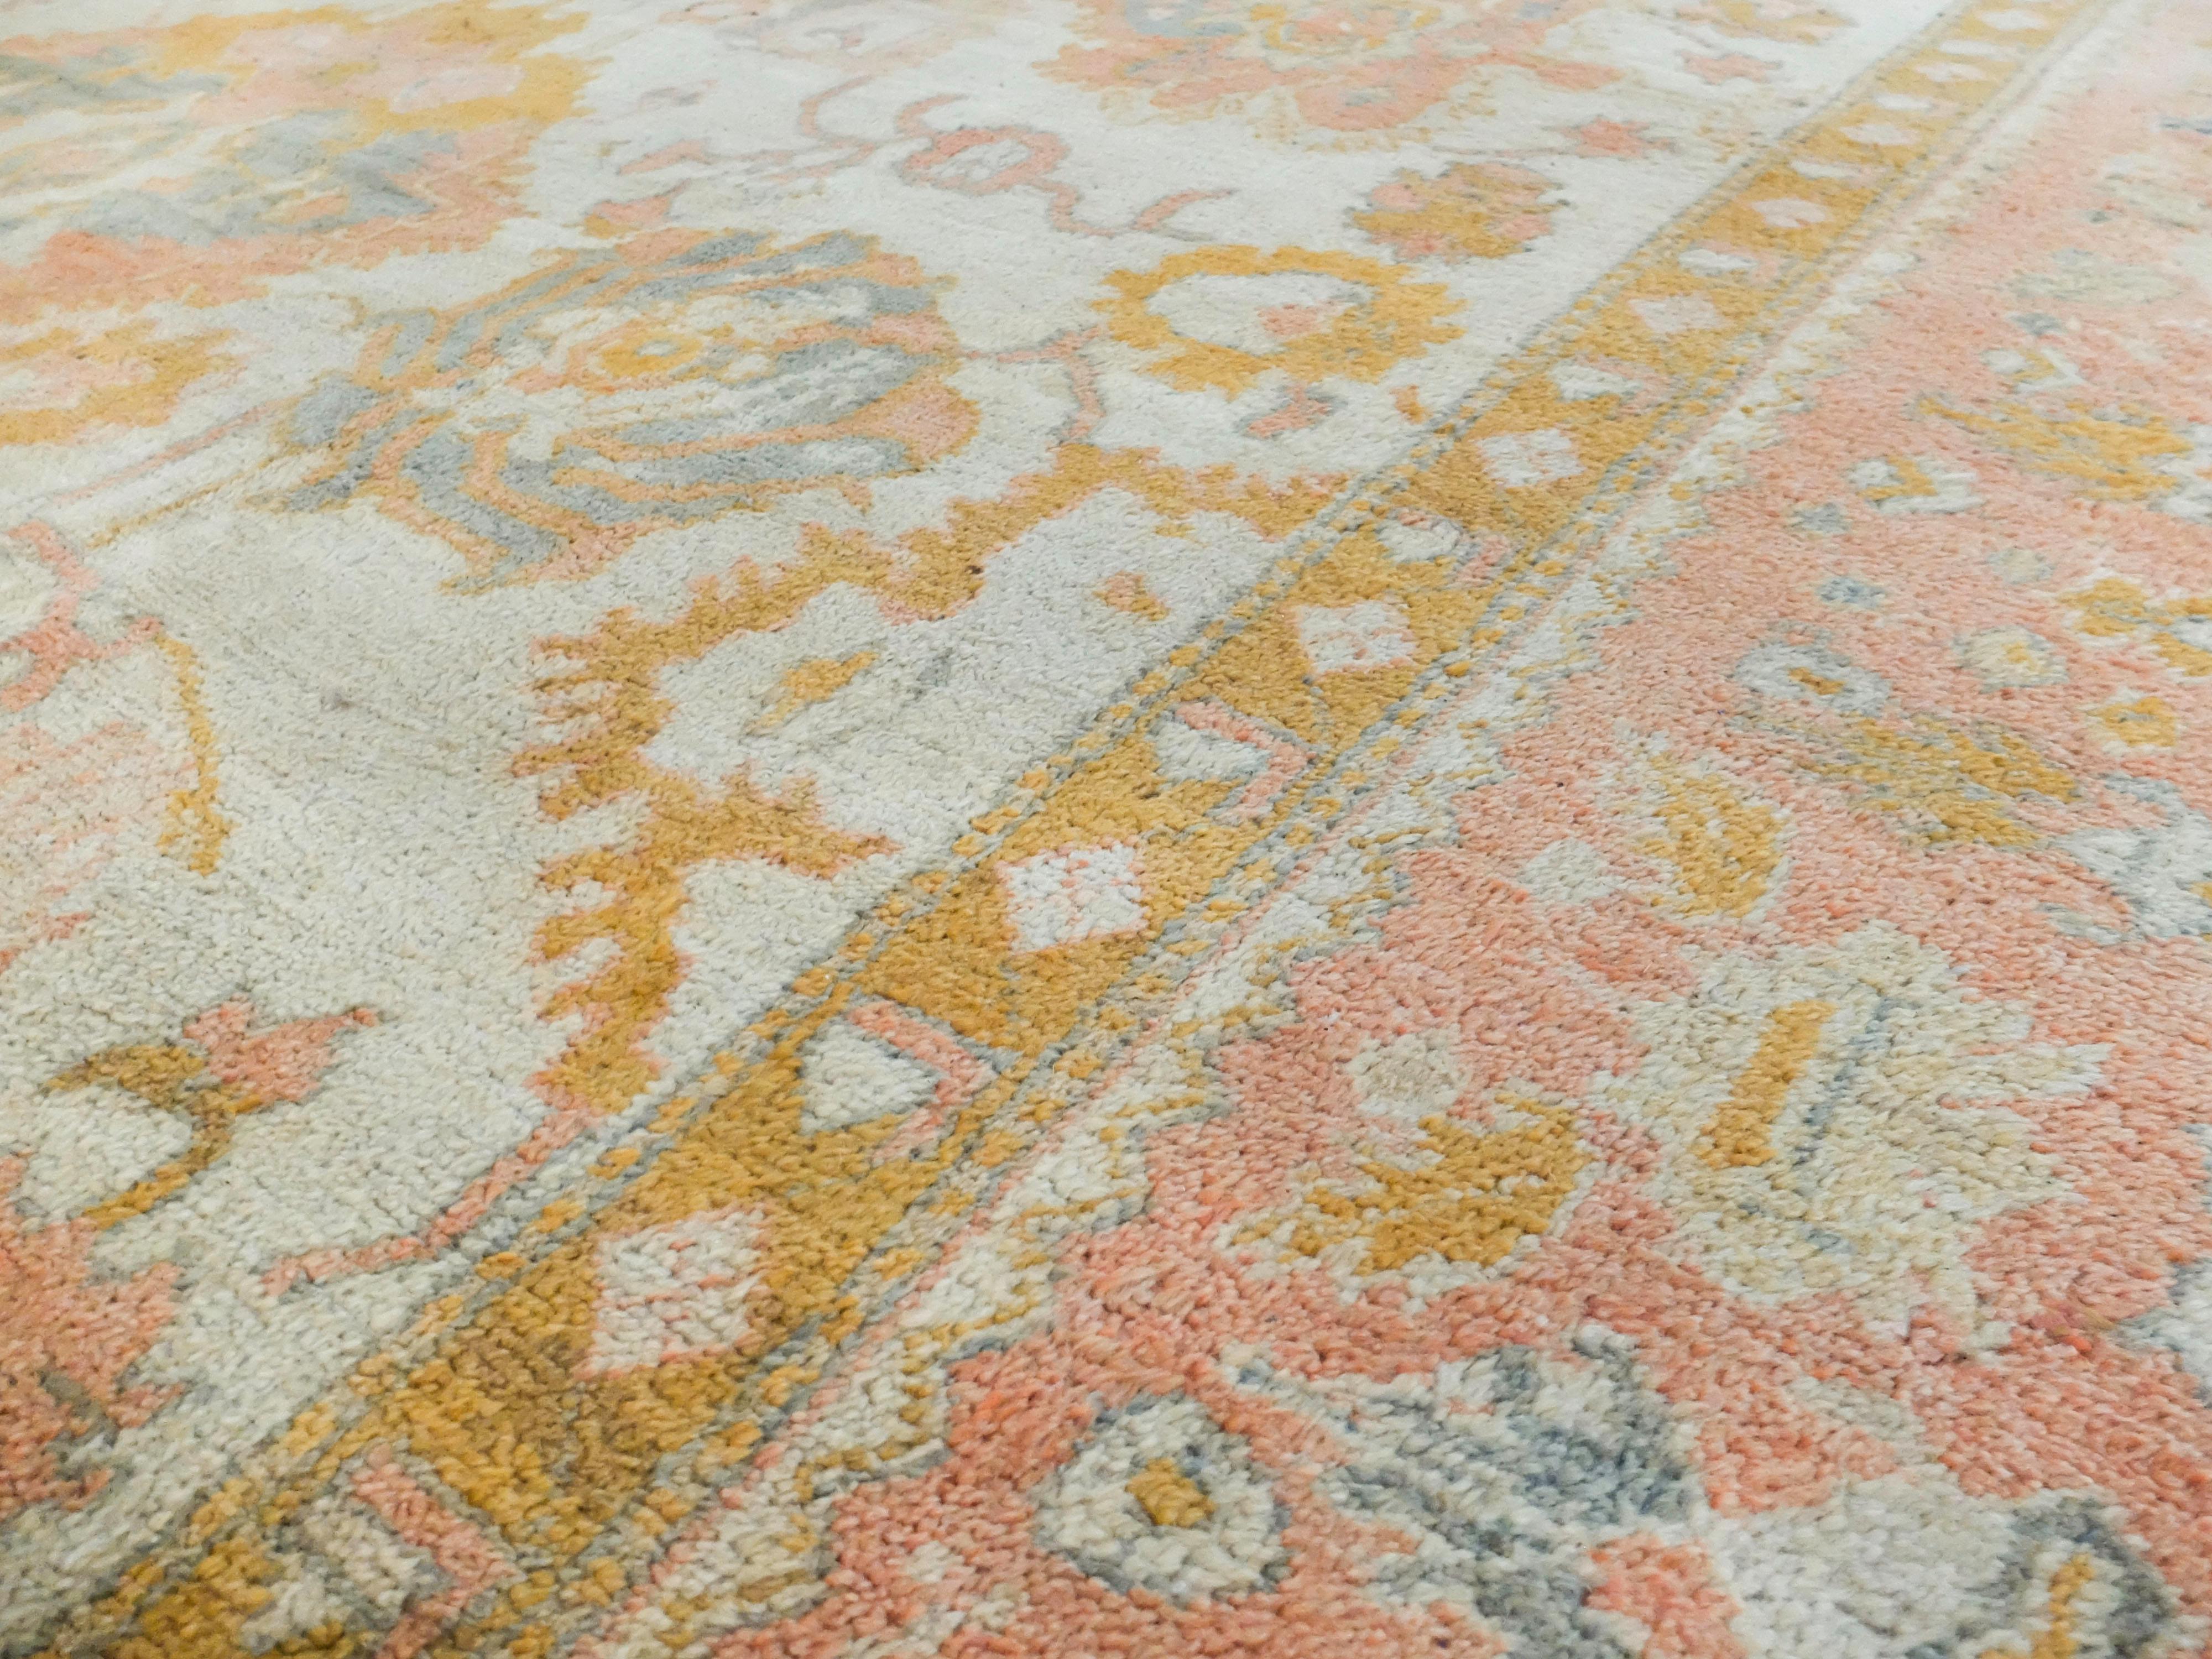 This is an Turkish Oushak rug made c. 1870s. It has a delicate soft peach, cream, and gold color way. The rugs center has large abstract floral shapes which are surrounded by 4 patterned borders. It is completed with subtle fringes at the top and